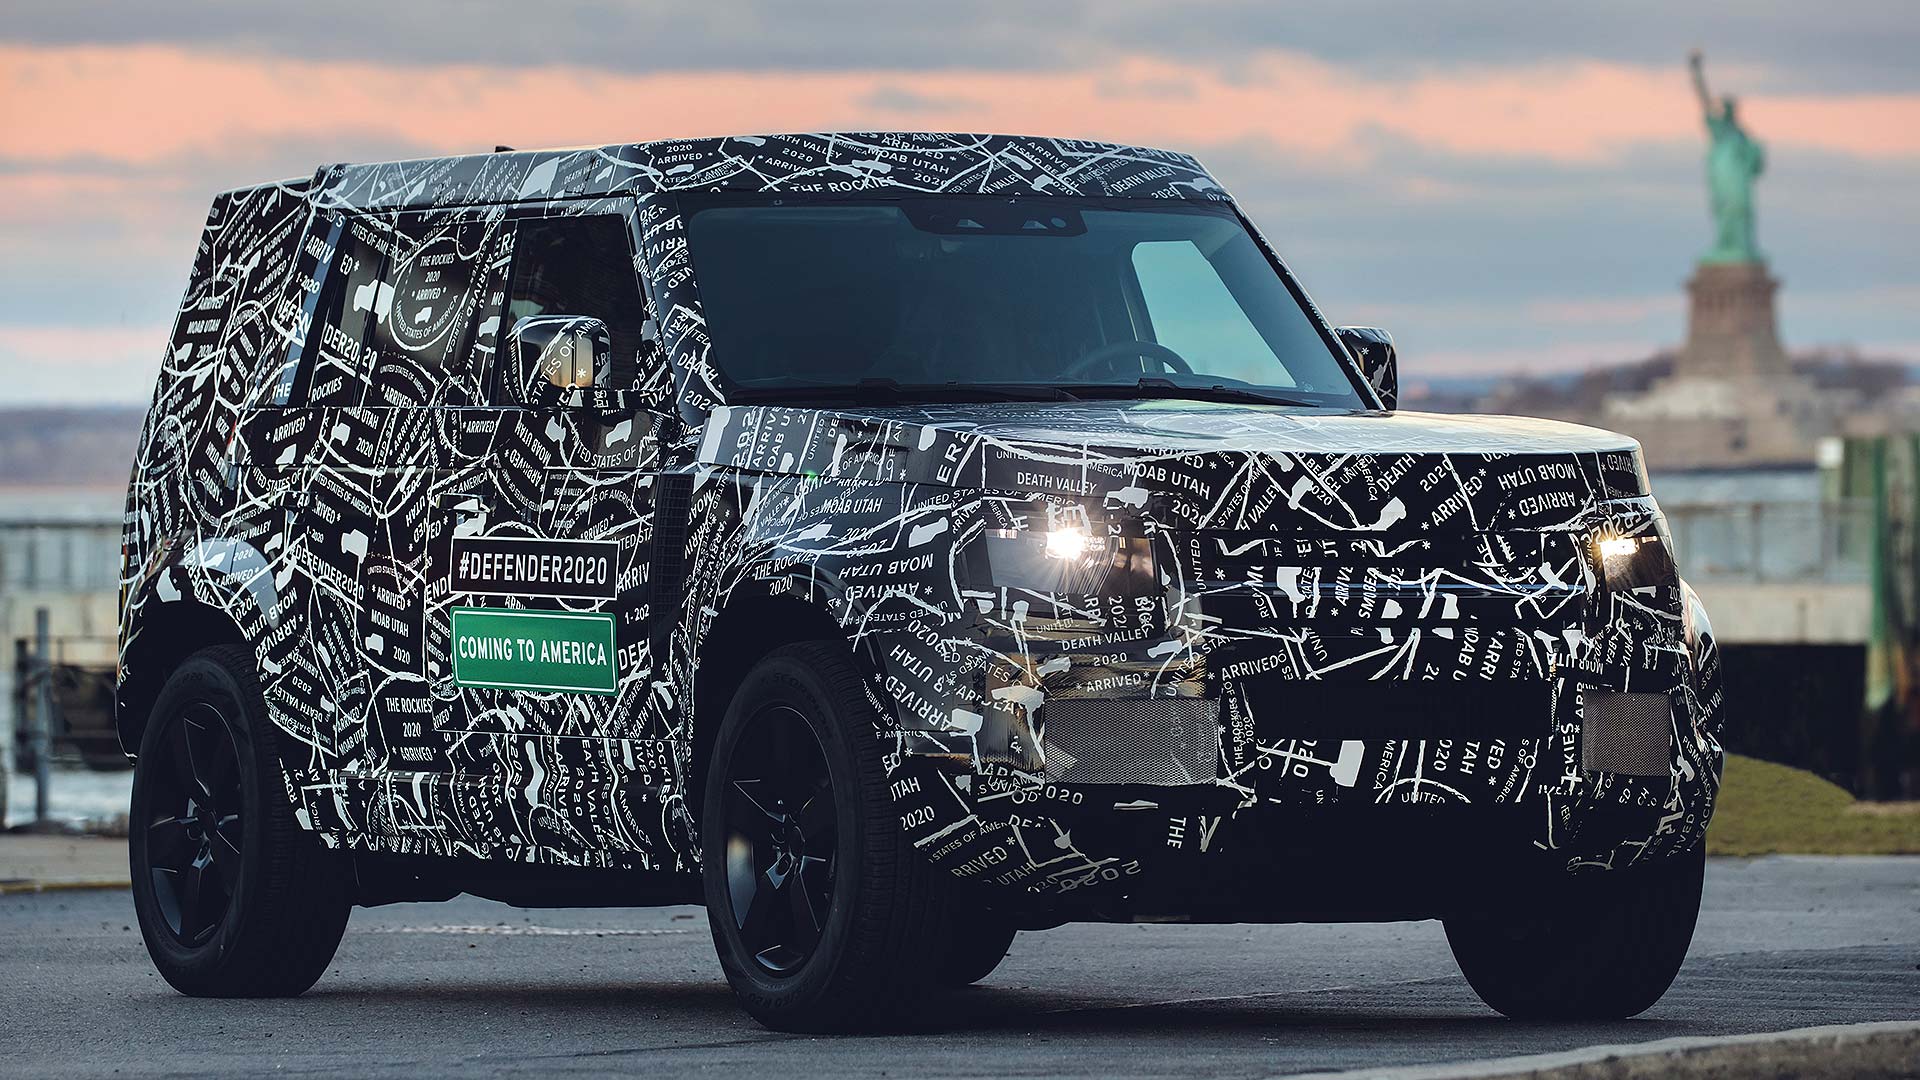 2019 Land Rover Defender disguised in America